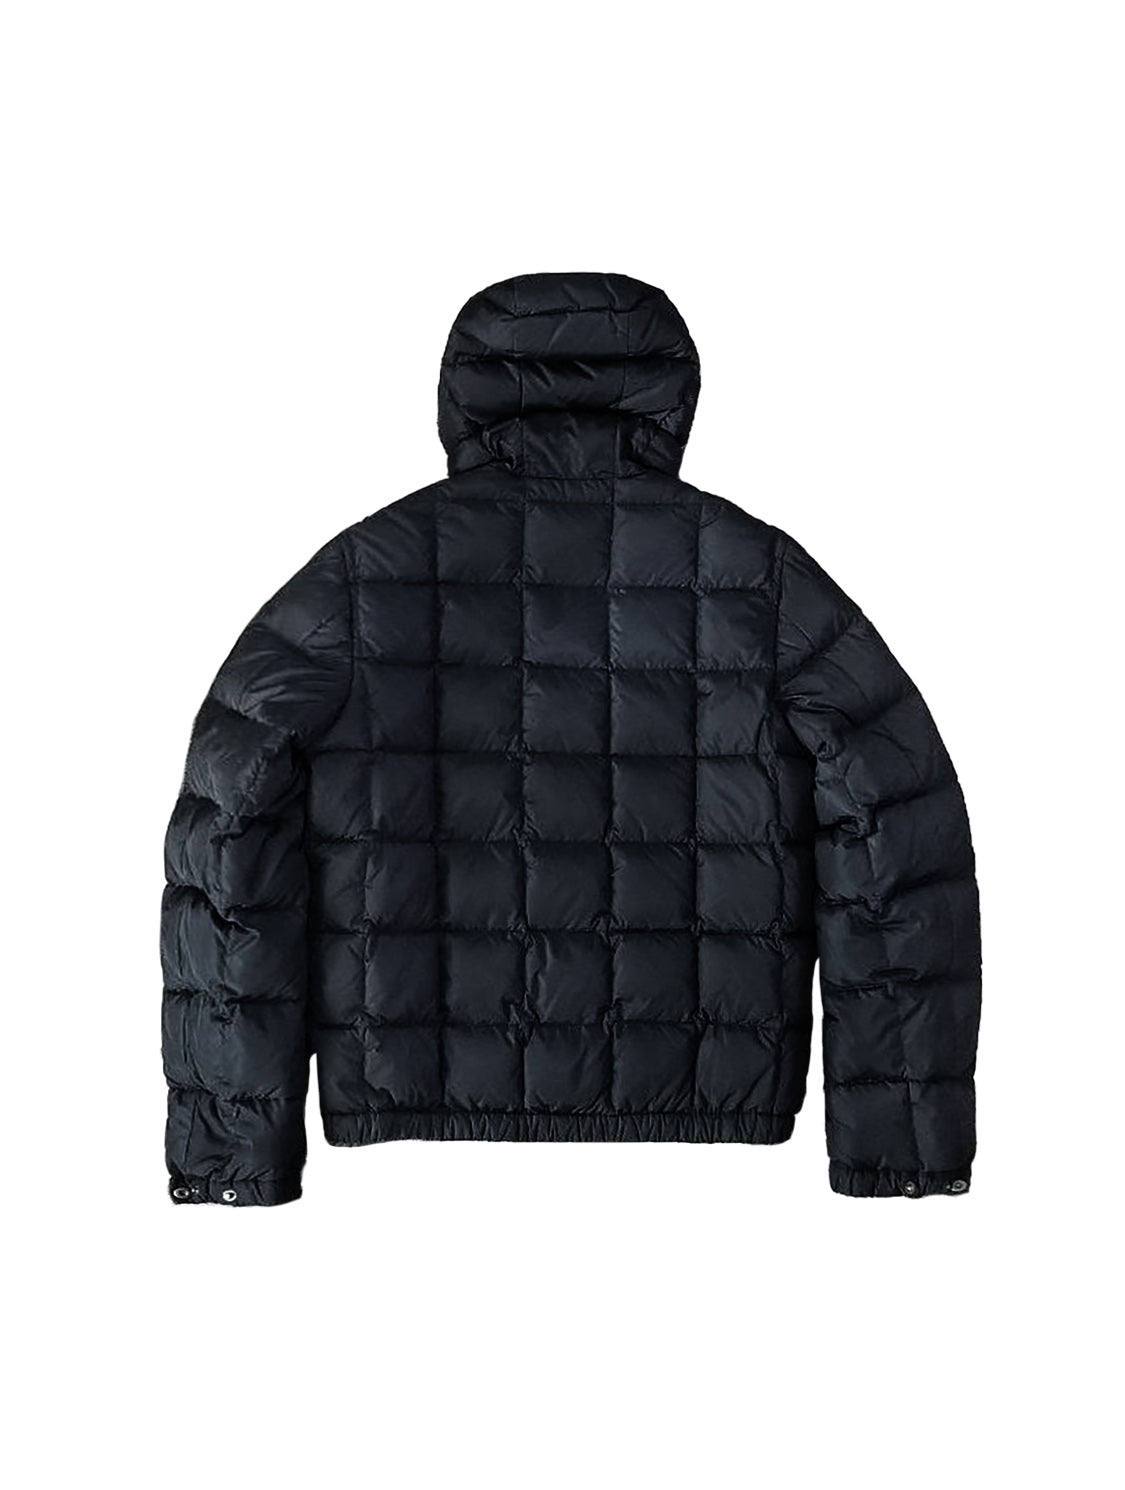 Prada 2000s Black Quilted Puffer Jacket · INTO